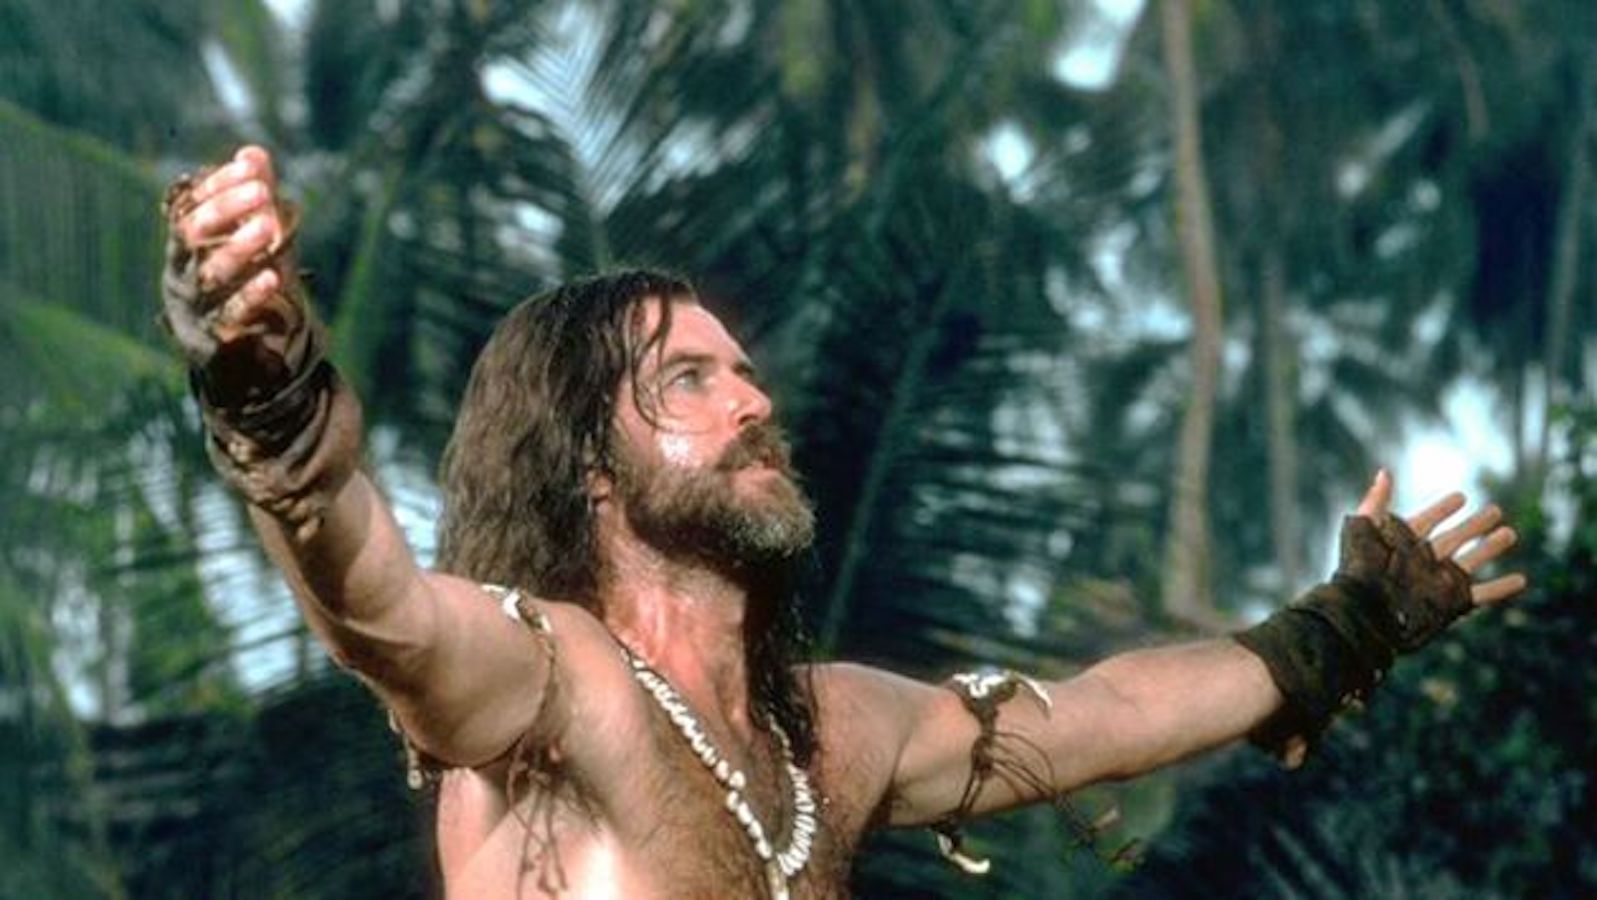 Pierce Brosnan in character as castaway Robinson Crusoe. He is a white man with long hair and an unkept beard. He is standing facing the right, shirtless, arms open wide, and looking up at something out of frame.